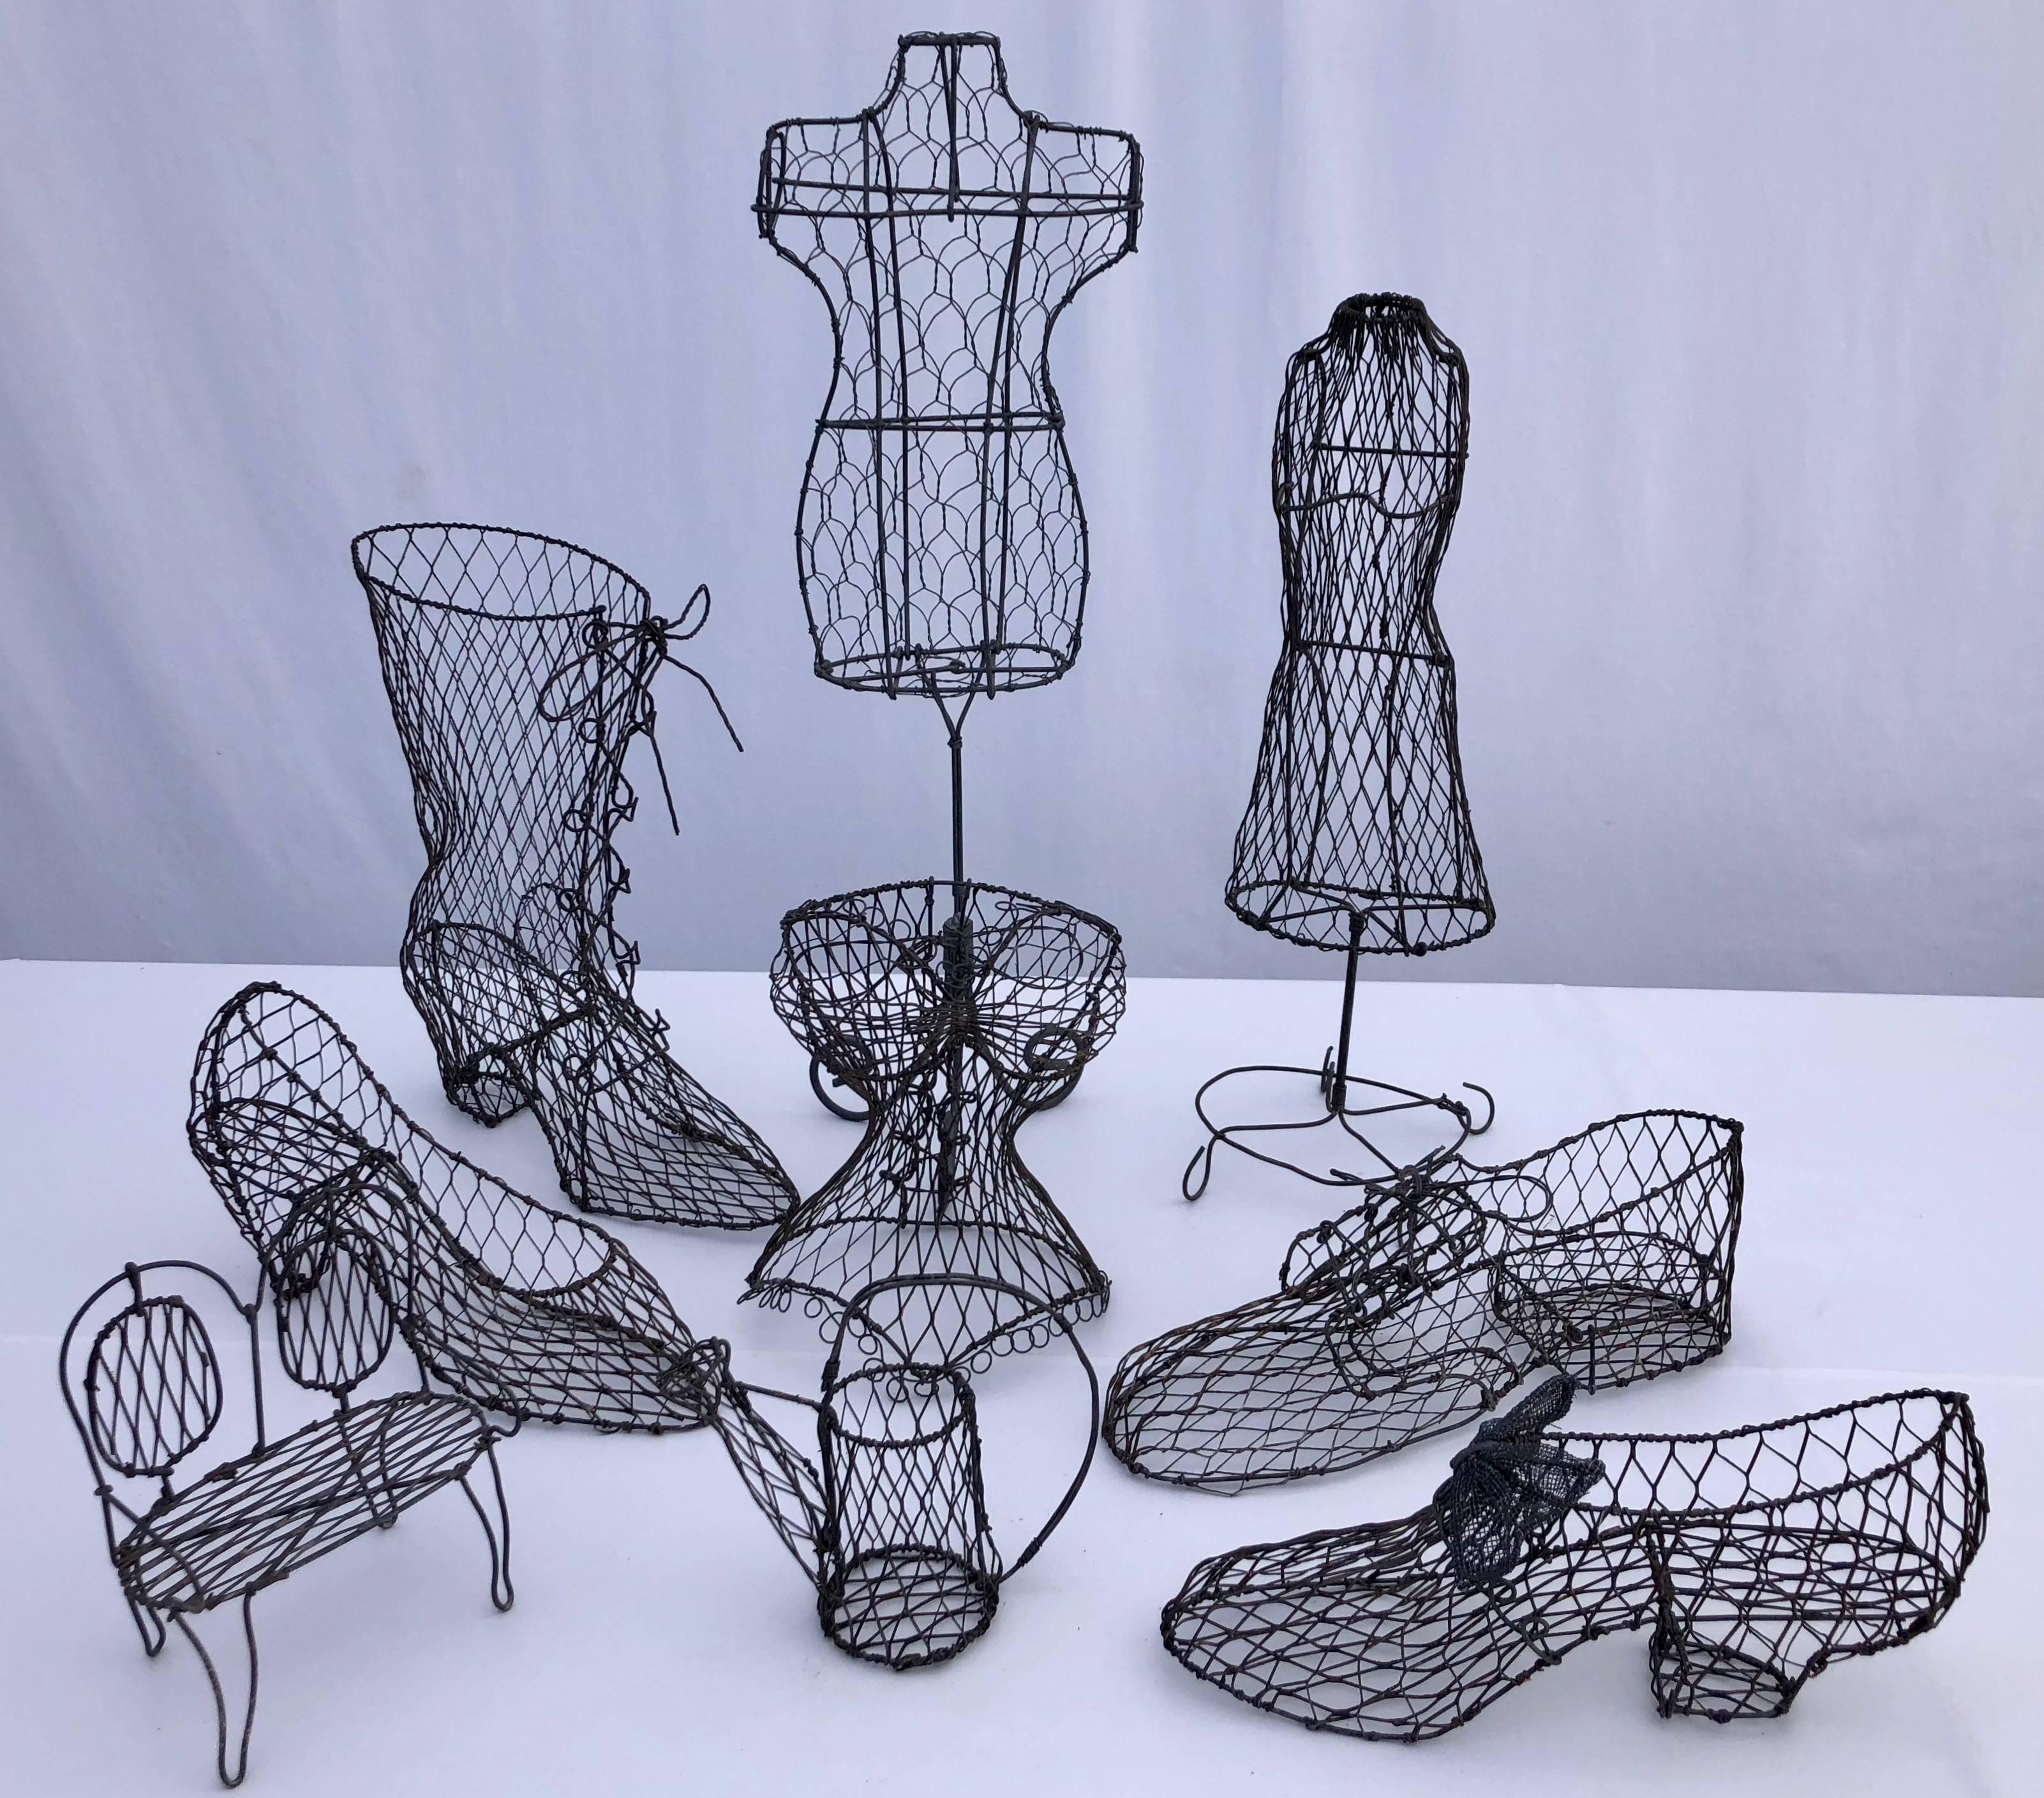 This is a great collection of nine French handmade wire art decorations from the mid-1900s. There are four styles of shoes, two mannequins on stands, a double backed settee, a bodice and a watering can. They have incredible detail, right down to